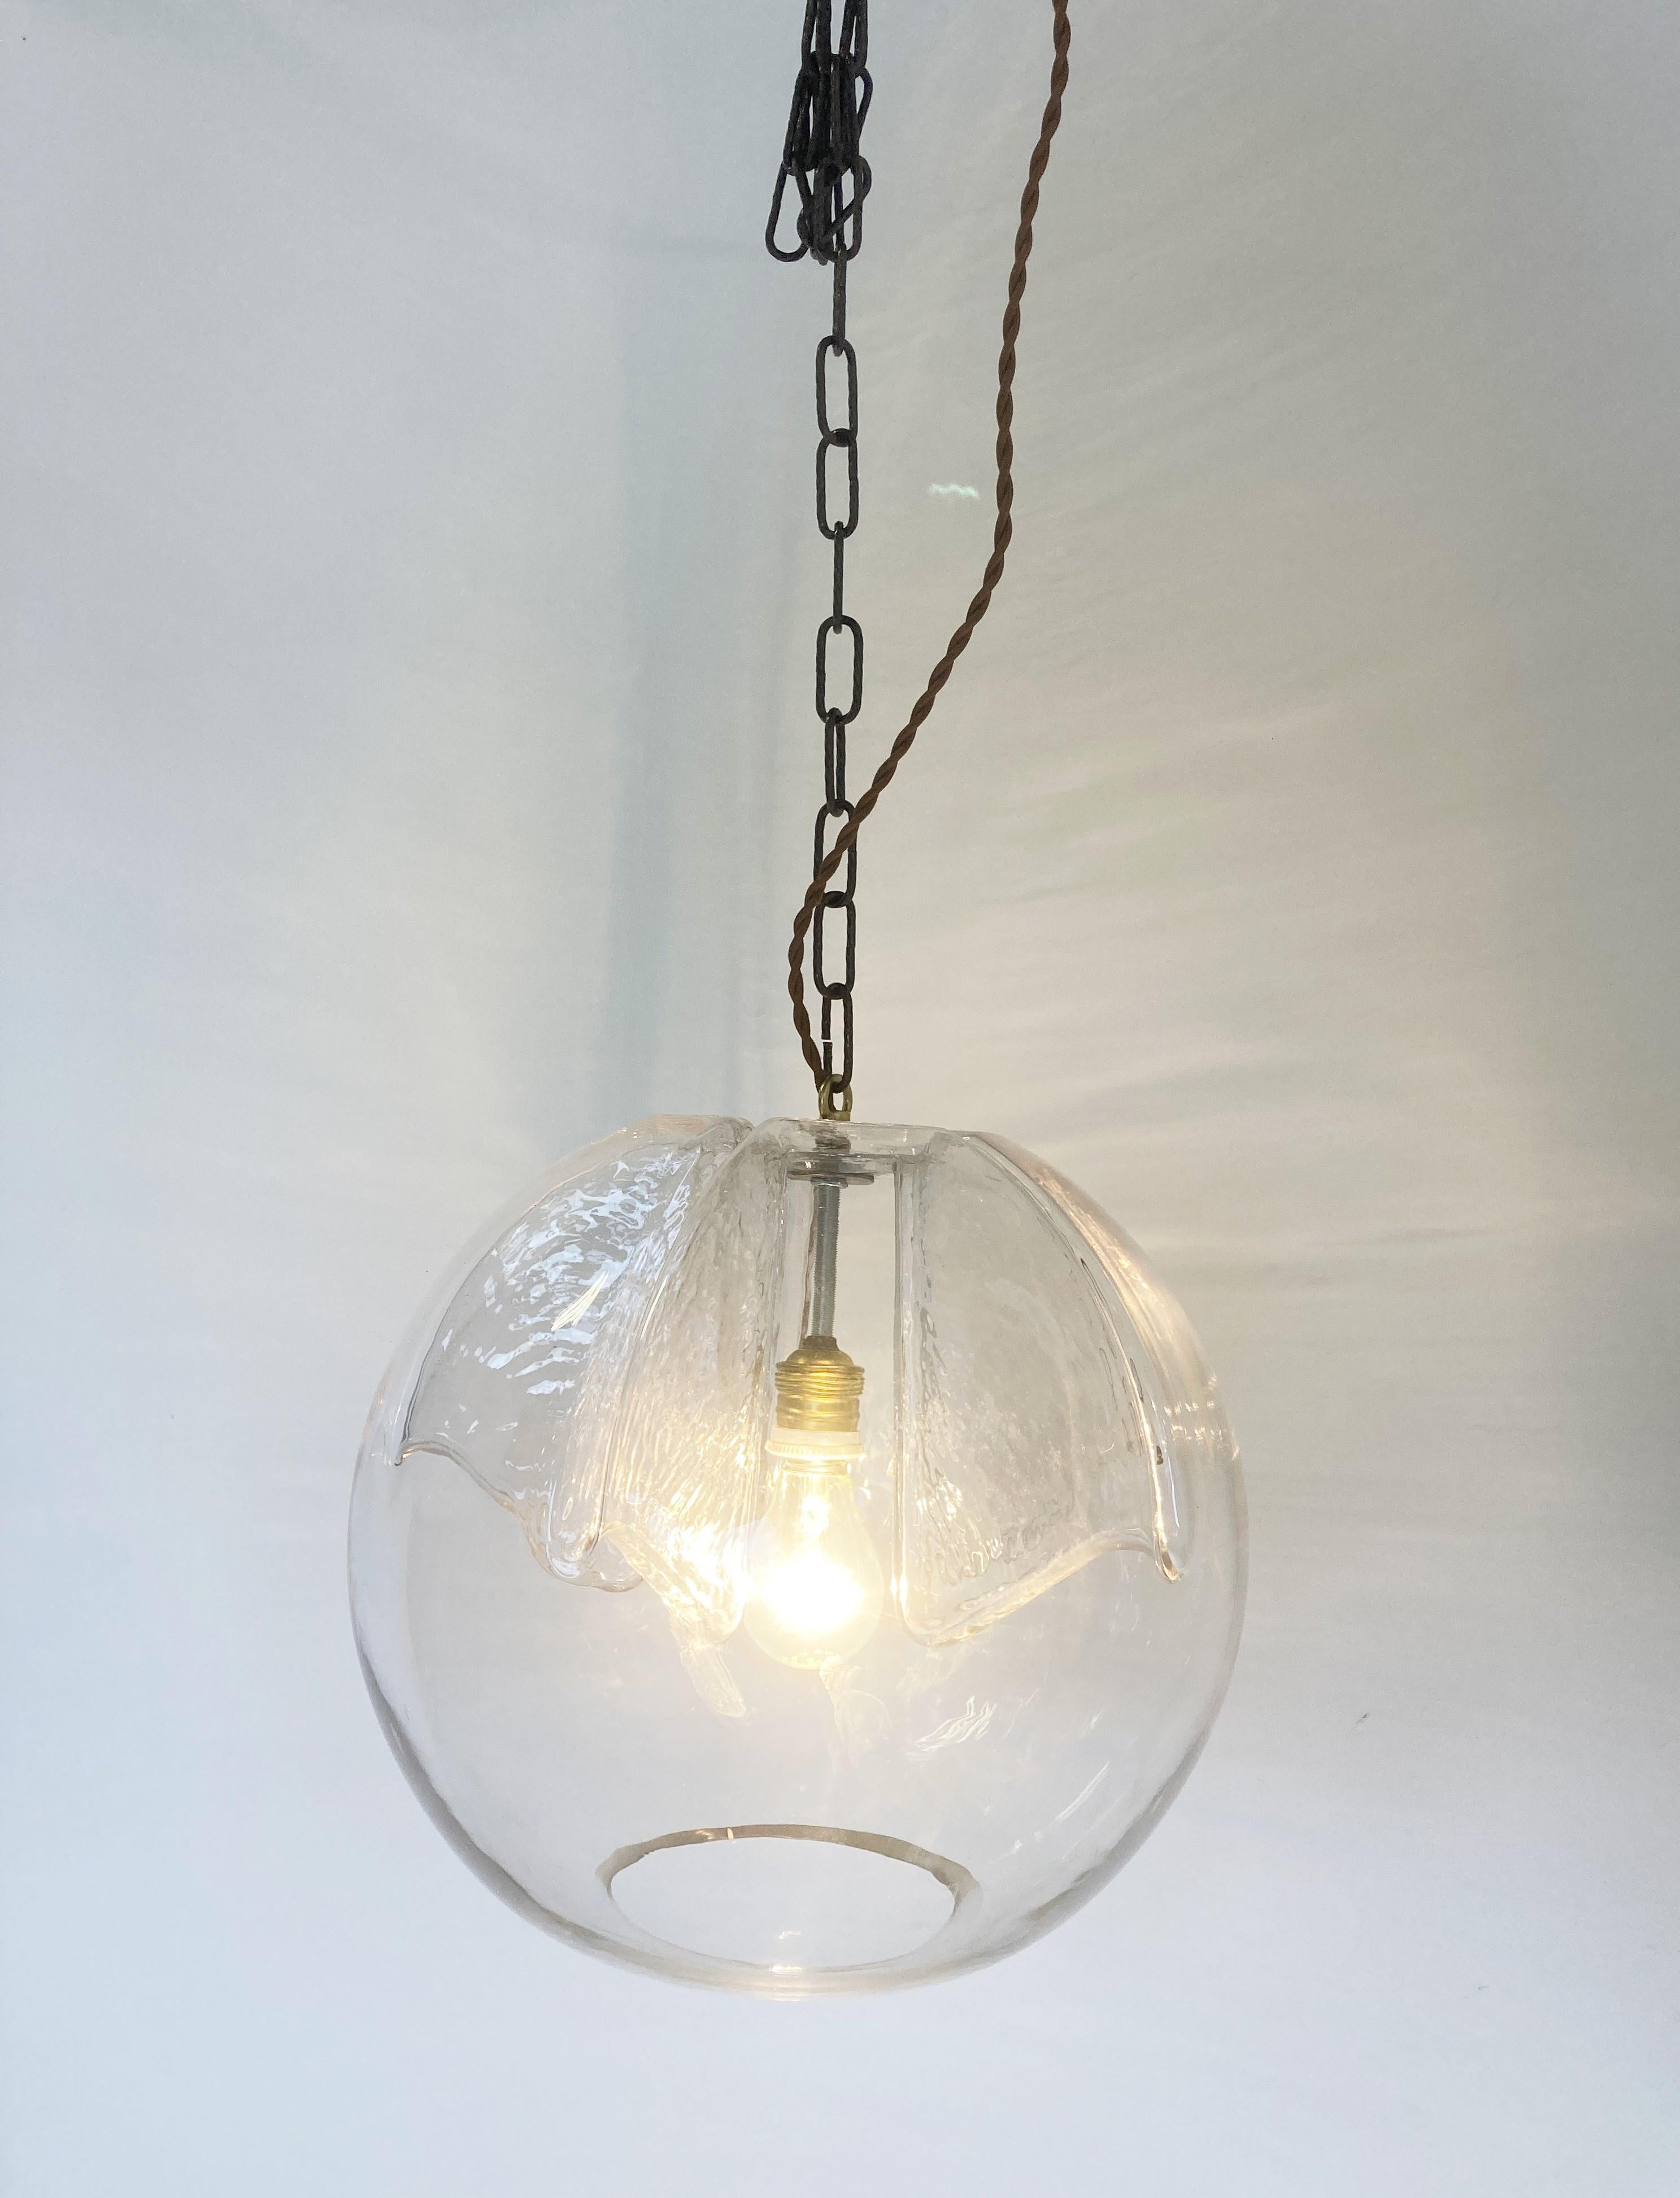 Vintage glass pendant light by Peil and Putzler.

The lamp emits a beautiful light thanks to its carefully designed glass.

Works with a regular E26/E27 light bulb, US compatible.

1970s - Germany

Dimensions:
height: 35cm/13.77